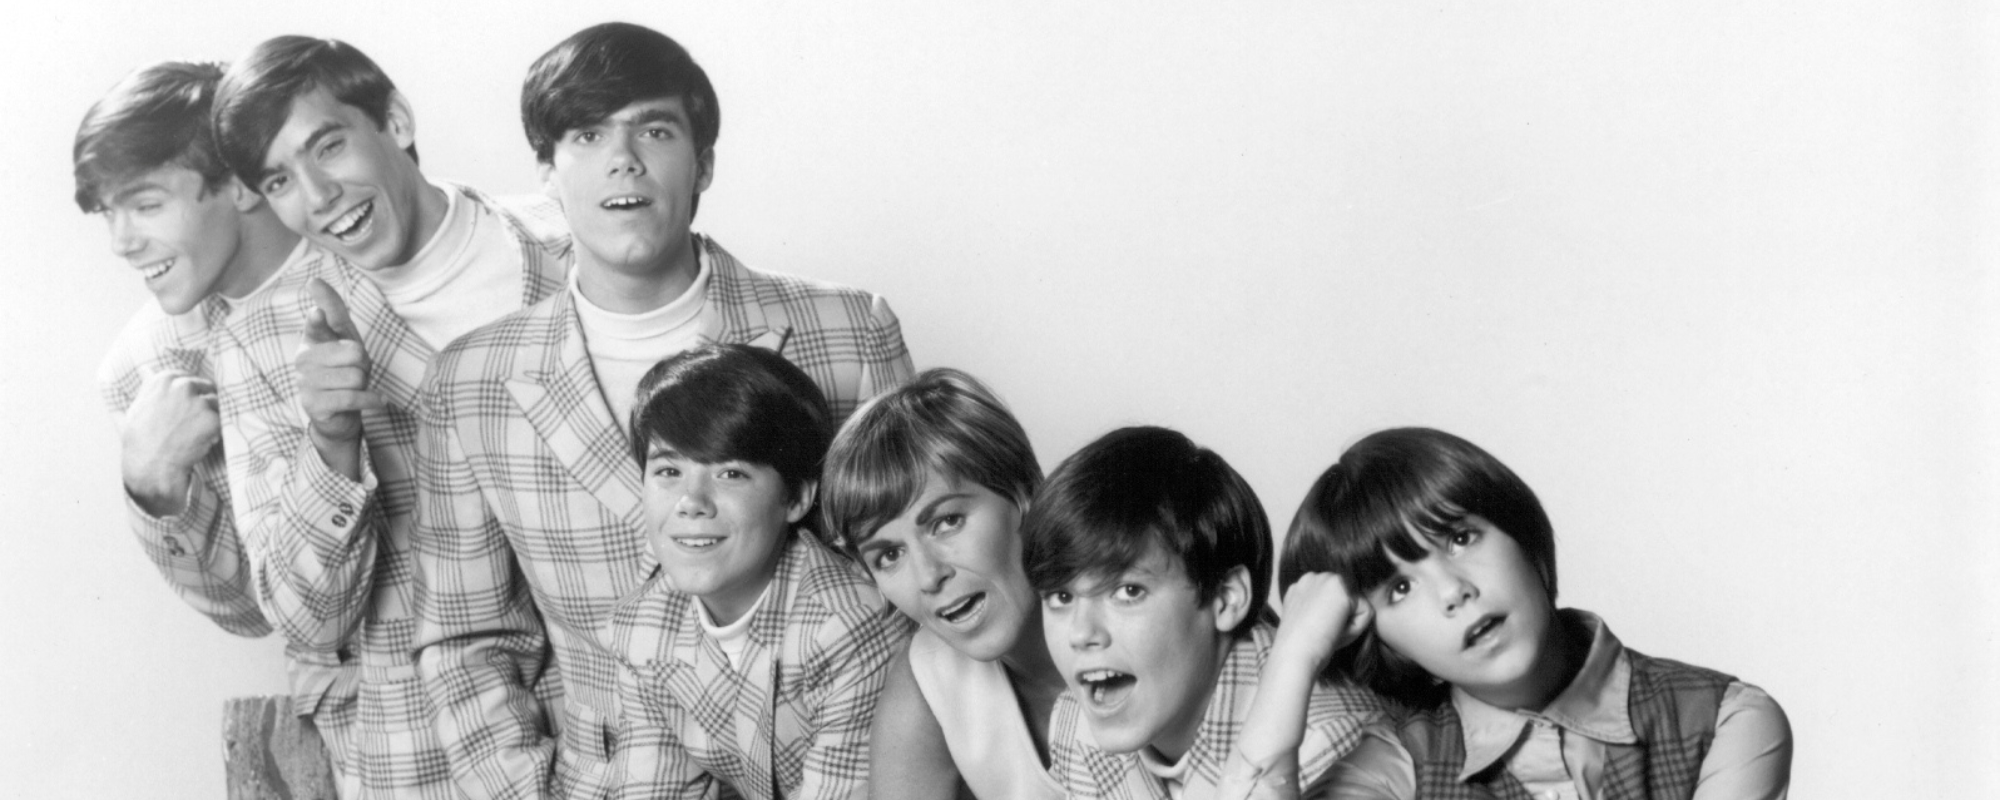 5 Fascinating Facts About the Woebegotten Band The Partridge Family Was Modeled on, The Cowsills